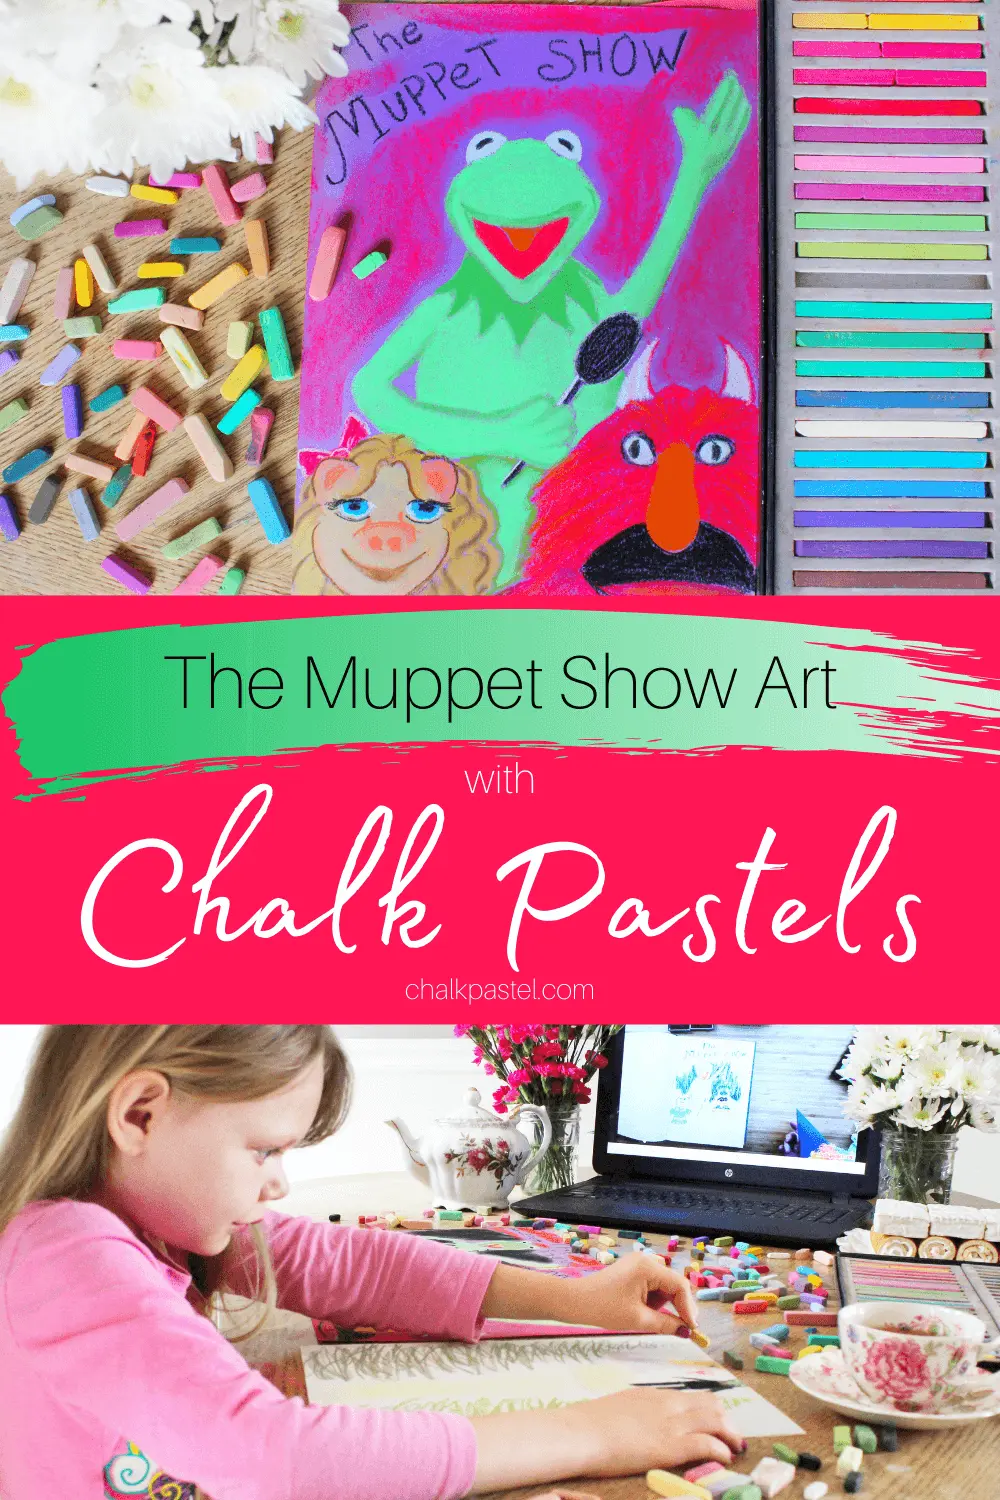 The Muppet Show with Chalk Pastels: Celebrate the release of The Muppet Show with chalk pastels! That's right Kermit the Frog, and Miss Piggy are taking center stage with Nana and her chalk pastel lessons! #chalkpastels #chalkpastelsatthemovies #TheMuppets #TheMuppetShow #Muppets #KermittheFrog #Kermit #MuppetShow #chalkpastelvideo #artlesson 